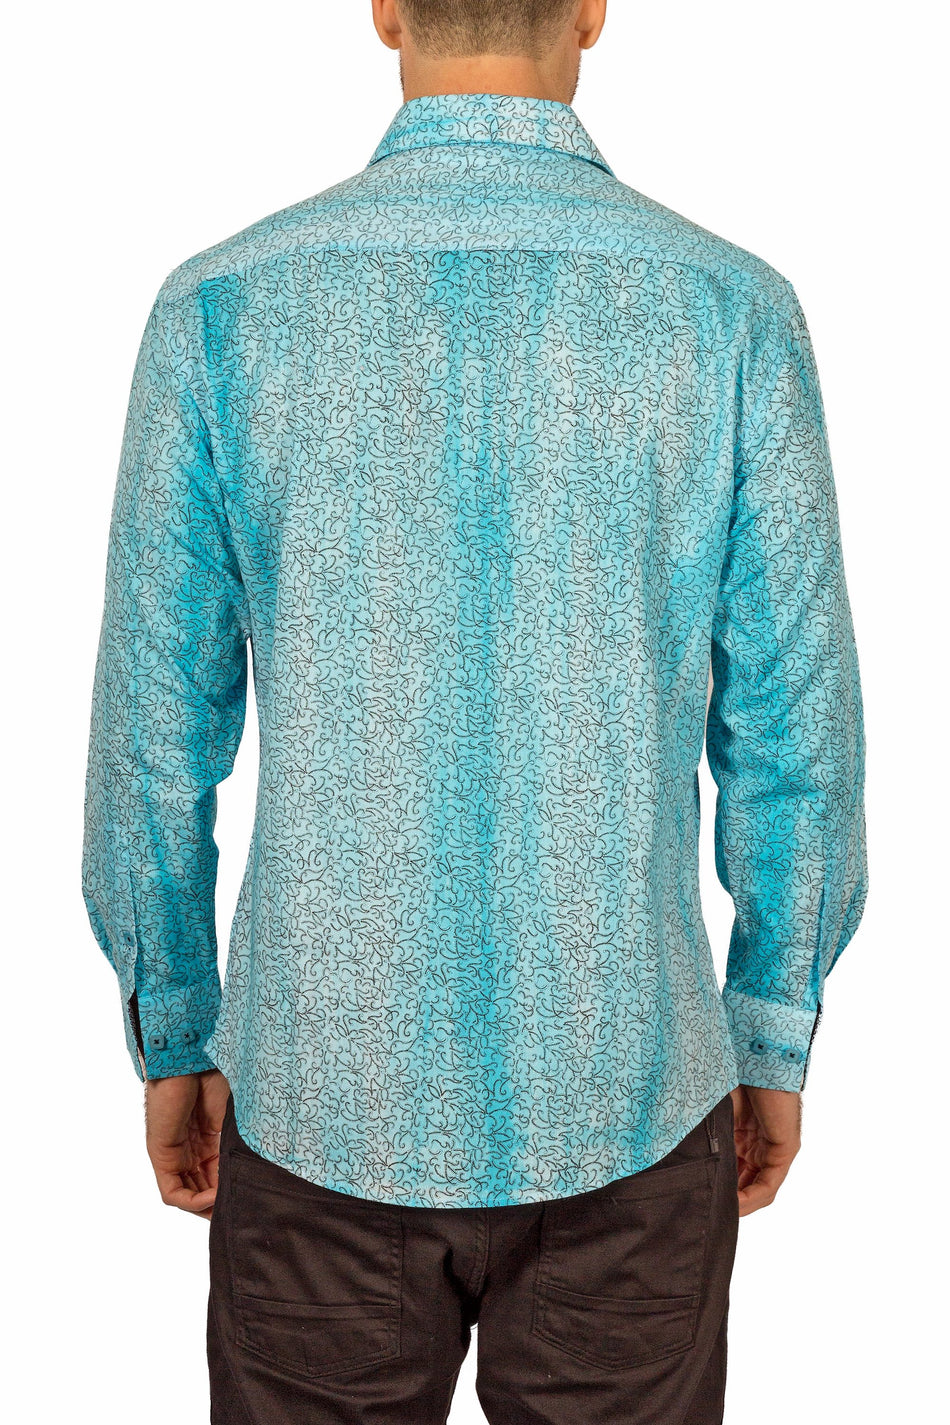 Men's Turquoise Abstract Pattern Long Sleeve Button Up